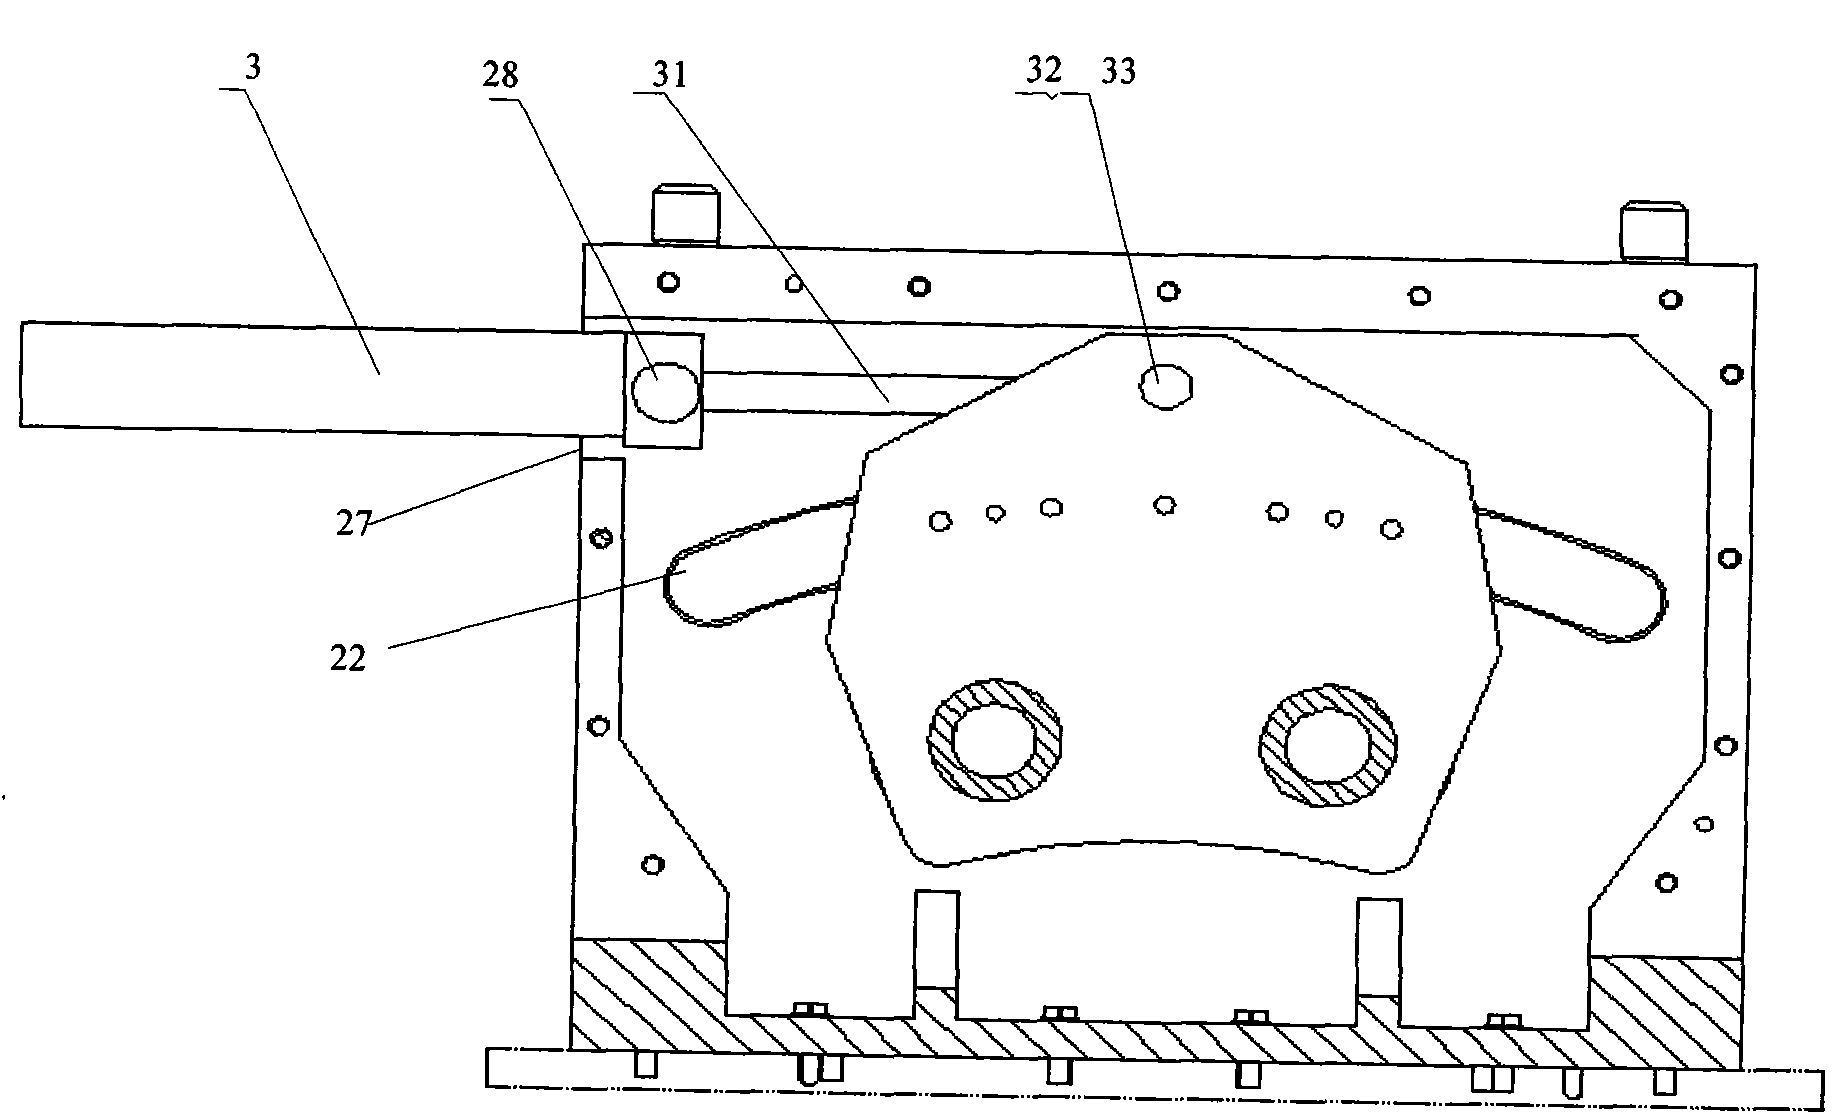 Control machine capable of carrying operation carrier to perform axial and circumferential motions relative to operation matrix